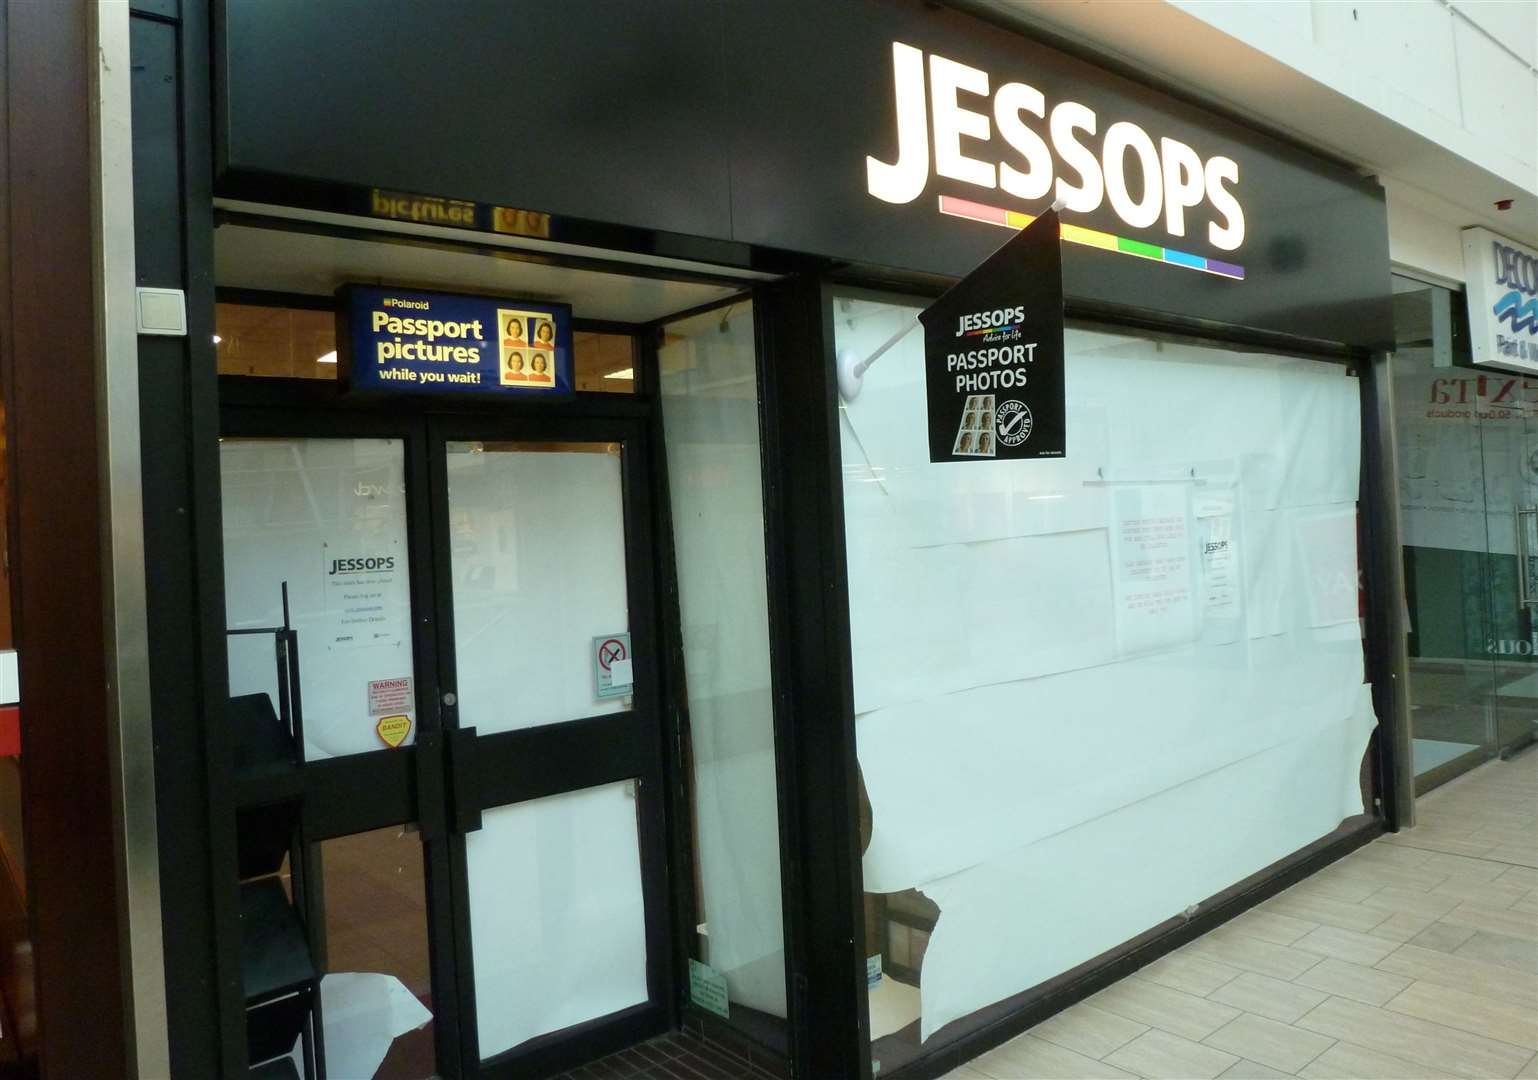 Jessops closed its County Square site in 2013. The unit is now home to The Works